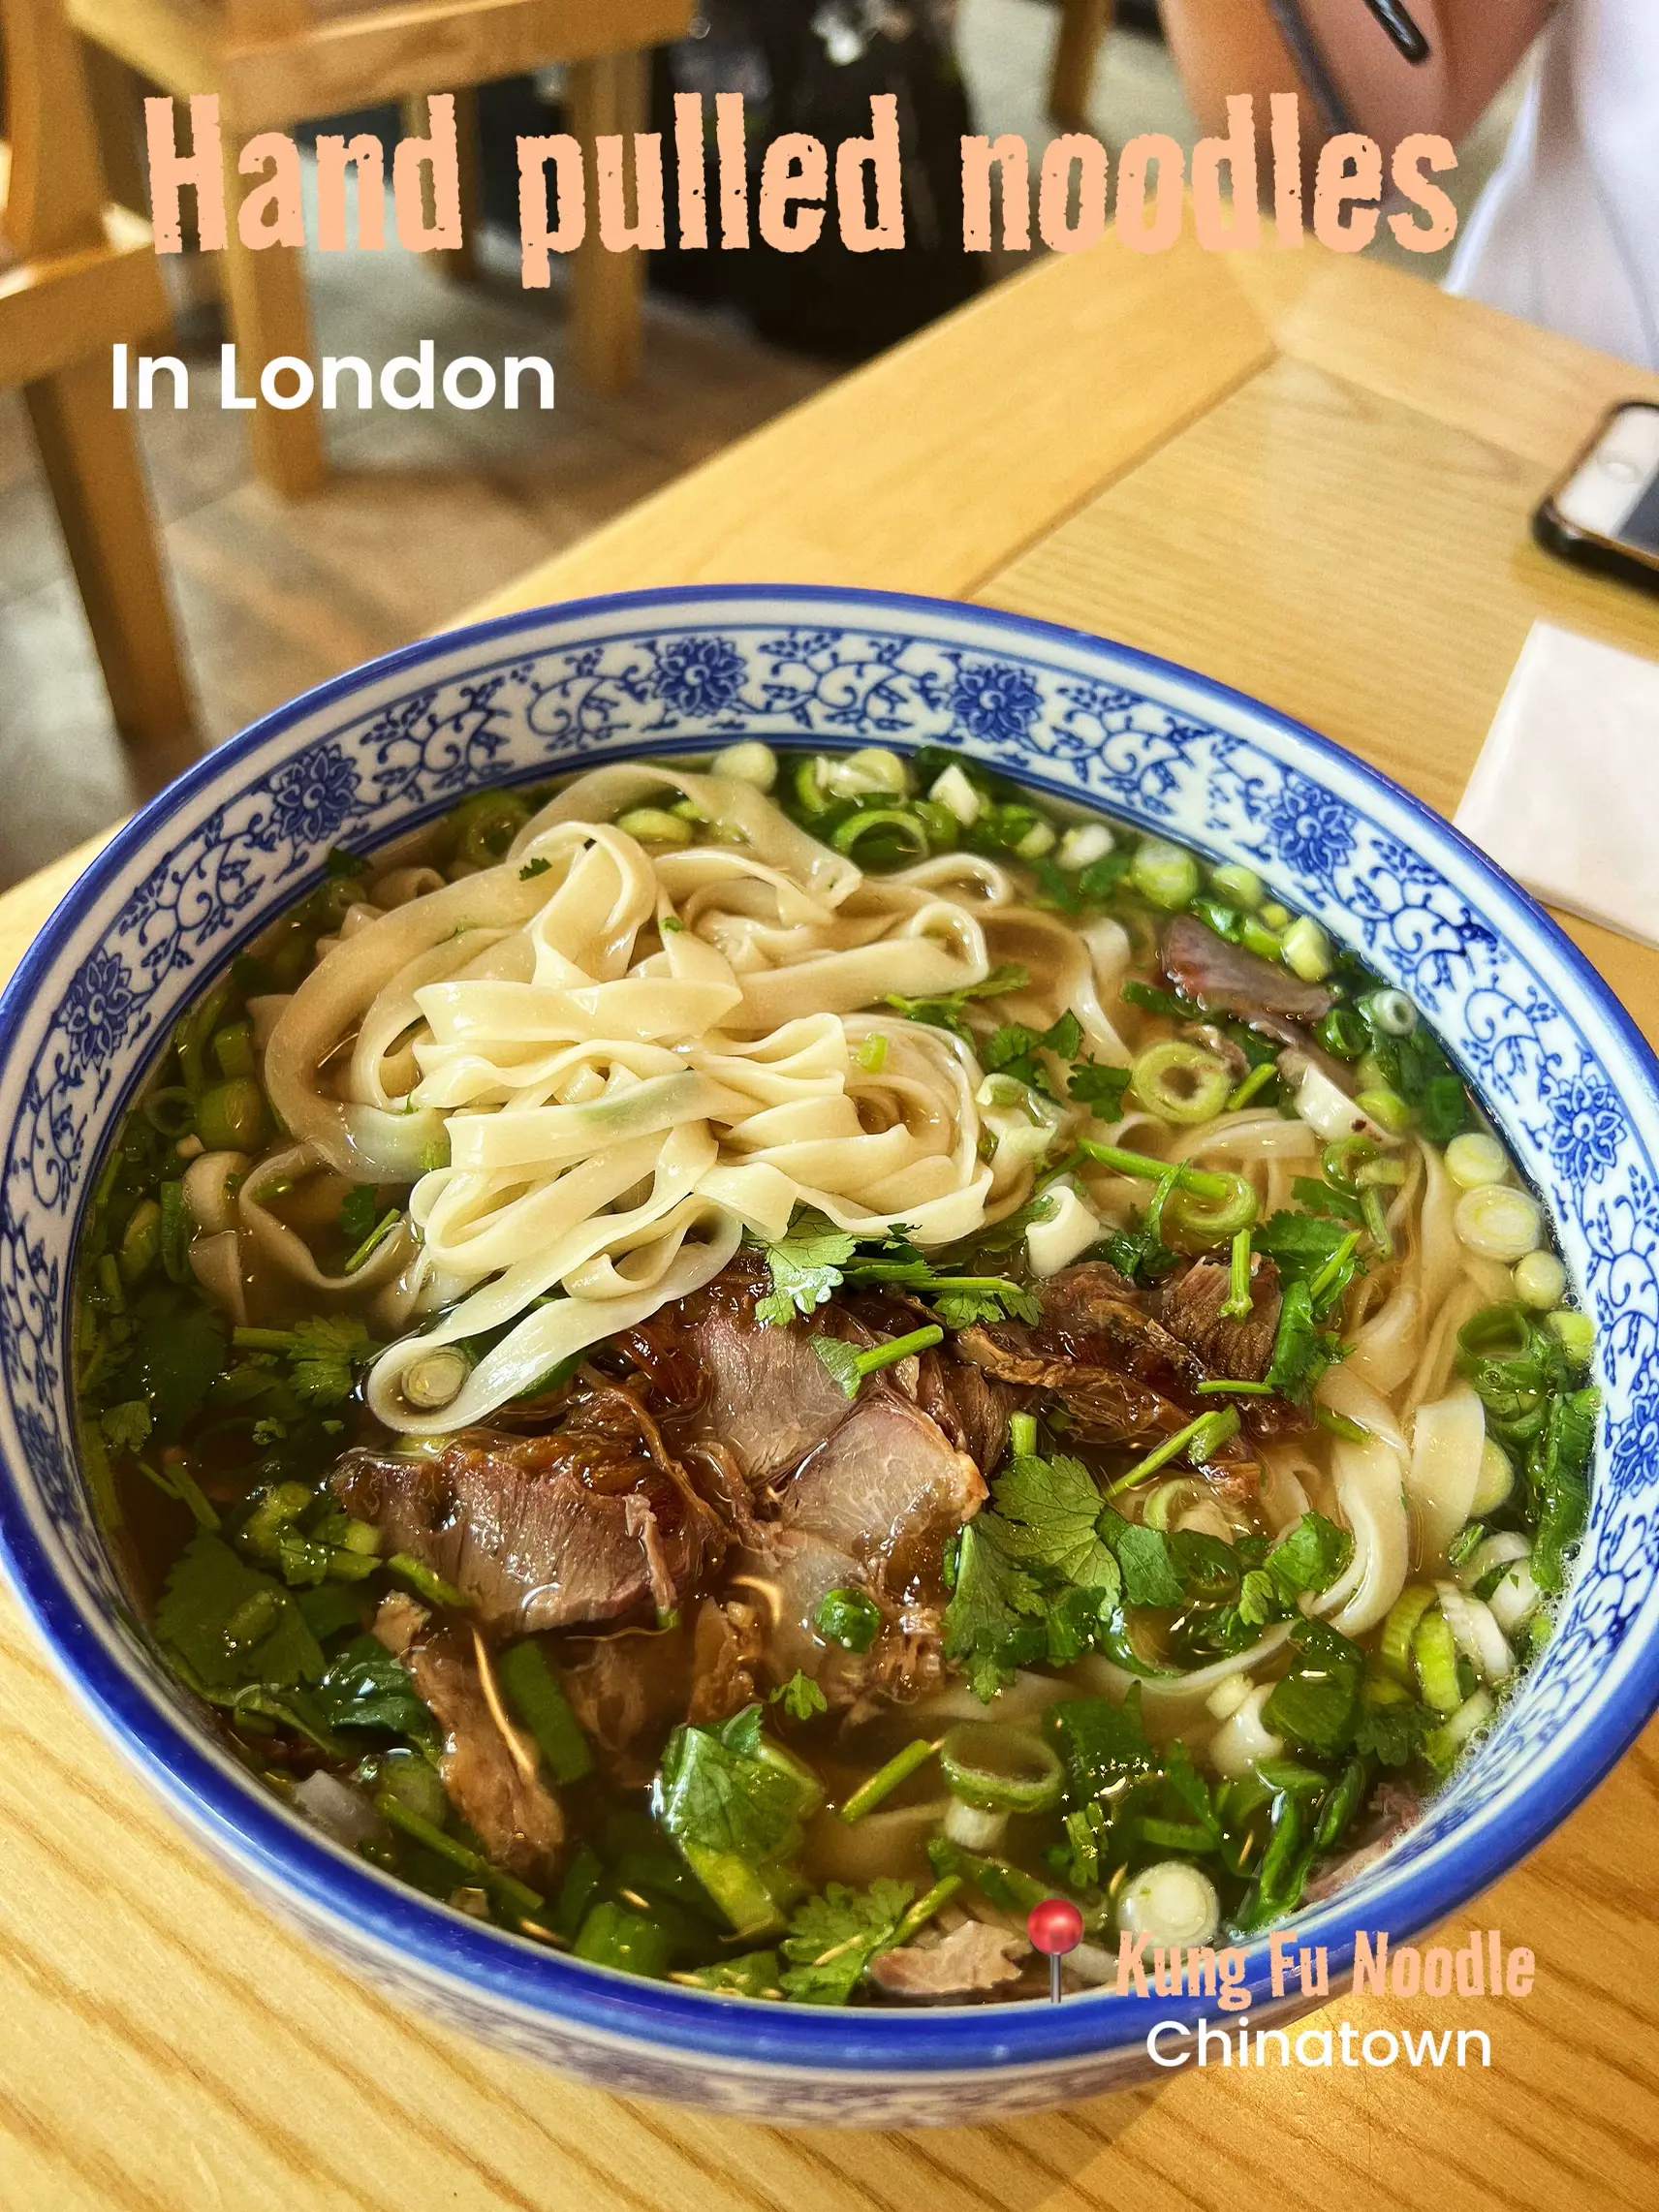 Chinese Noodle House with Hand-Pulled Noodles in Kl - Lemon8 Search